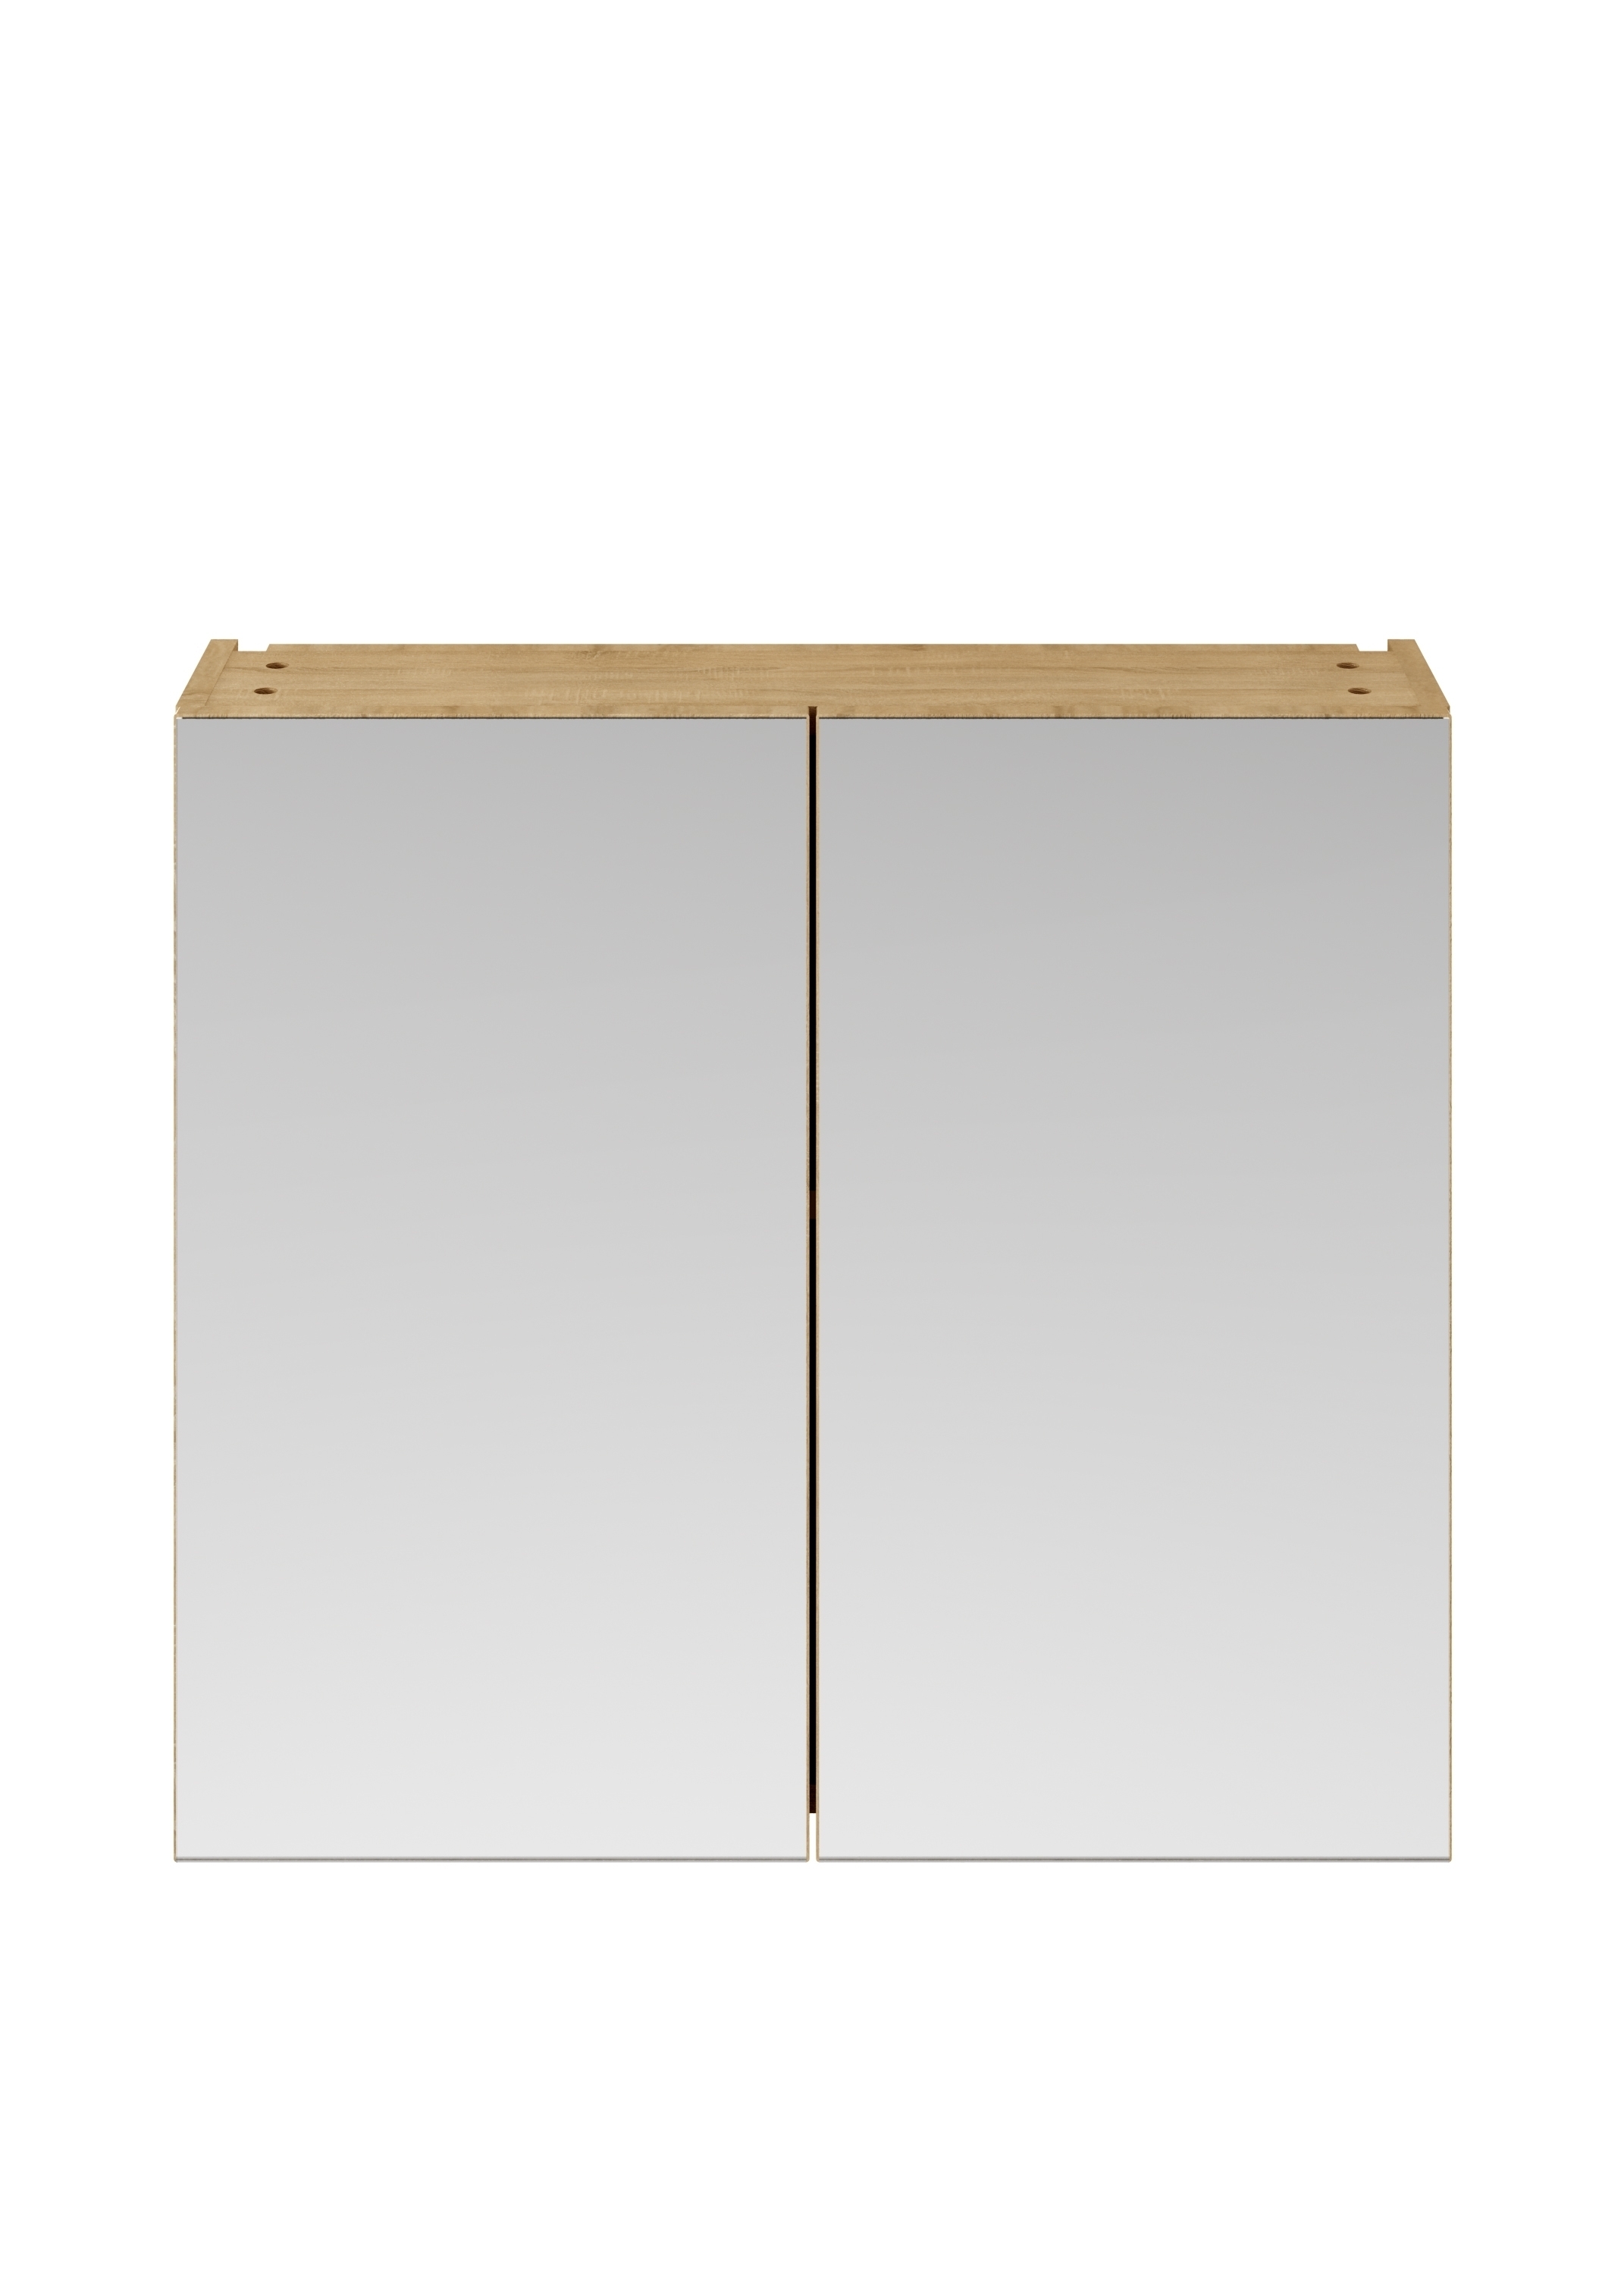 Nuie Athena (50/50) Mirrored Cabinet  800mm Wide - Natural Oak - OFF319 